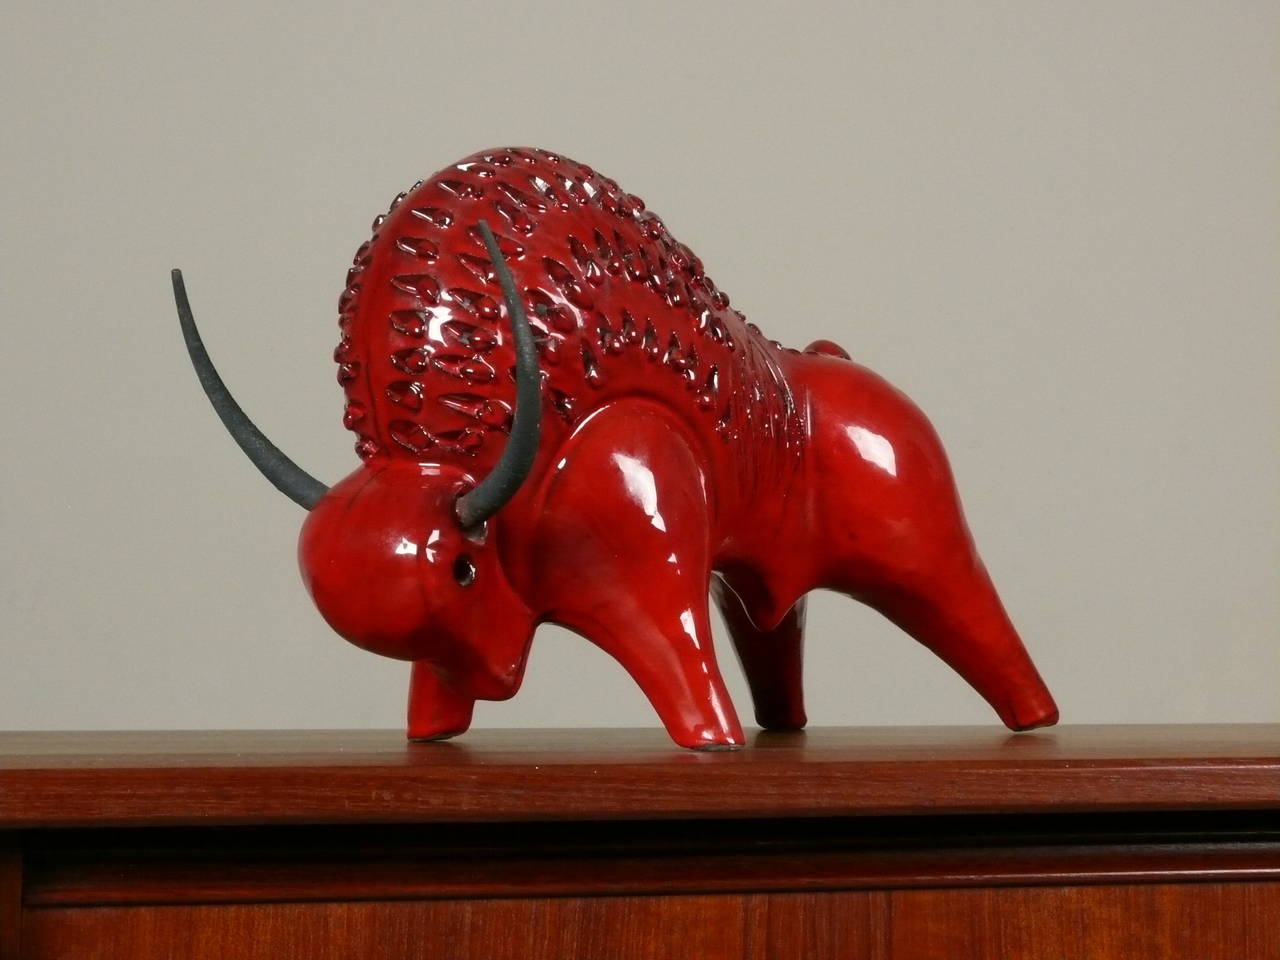 Large ceramic and steel bull by Alvino Bagni for Raymor, Italy.  The stylized stoneware figure is detailed with incised design work and rich red glaze treatment.